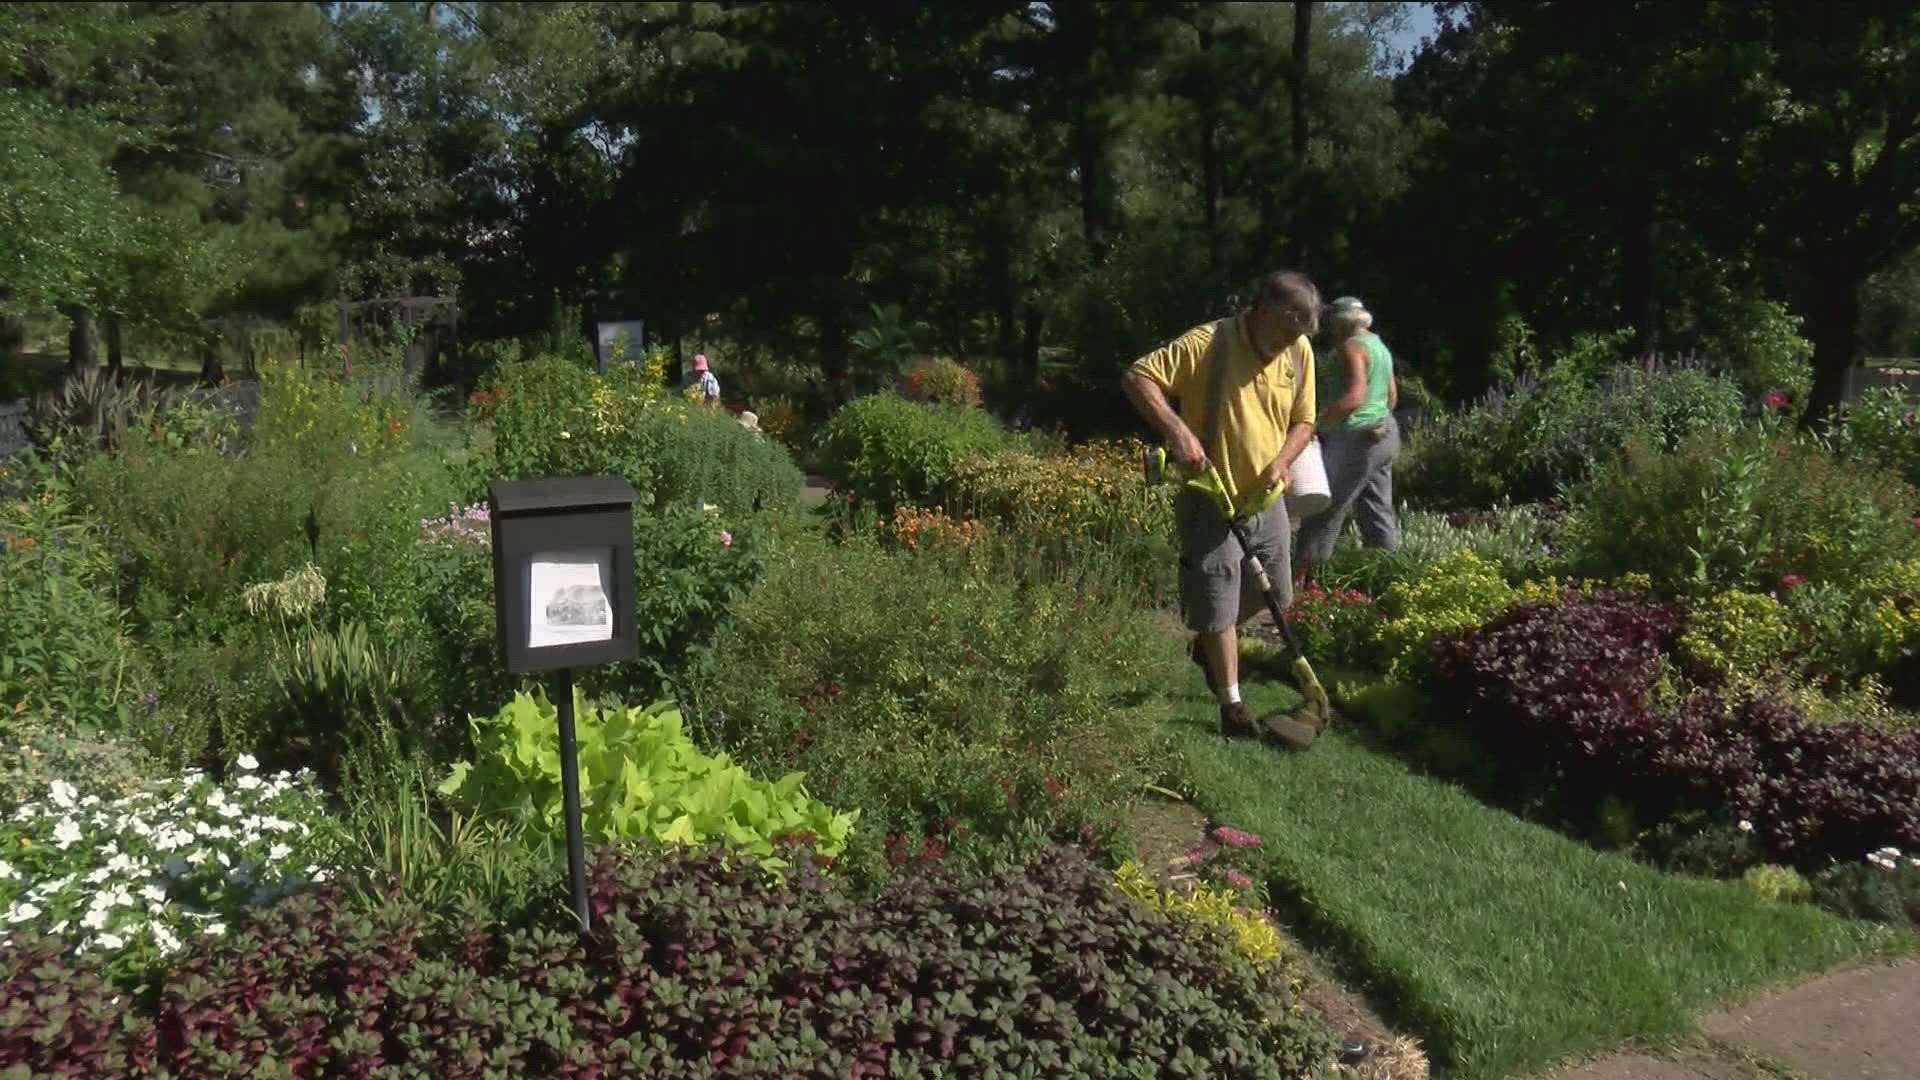 In Week 3 of Smith County Master Gardener Series, we discuss the warning signs of heat exhaustion and how to stay cool while working in your garden